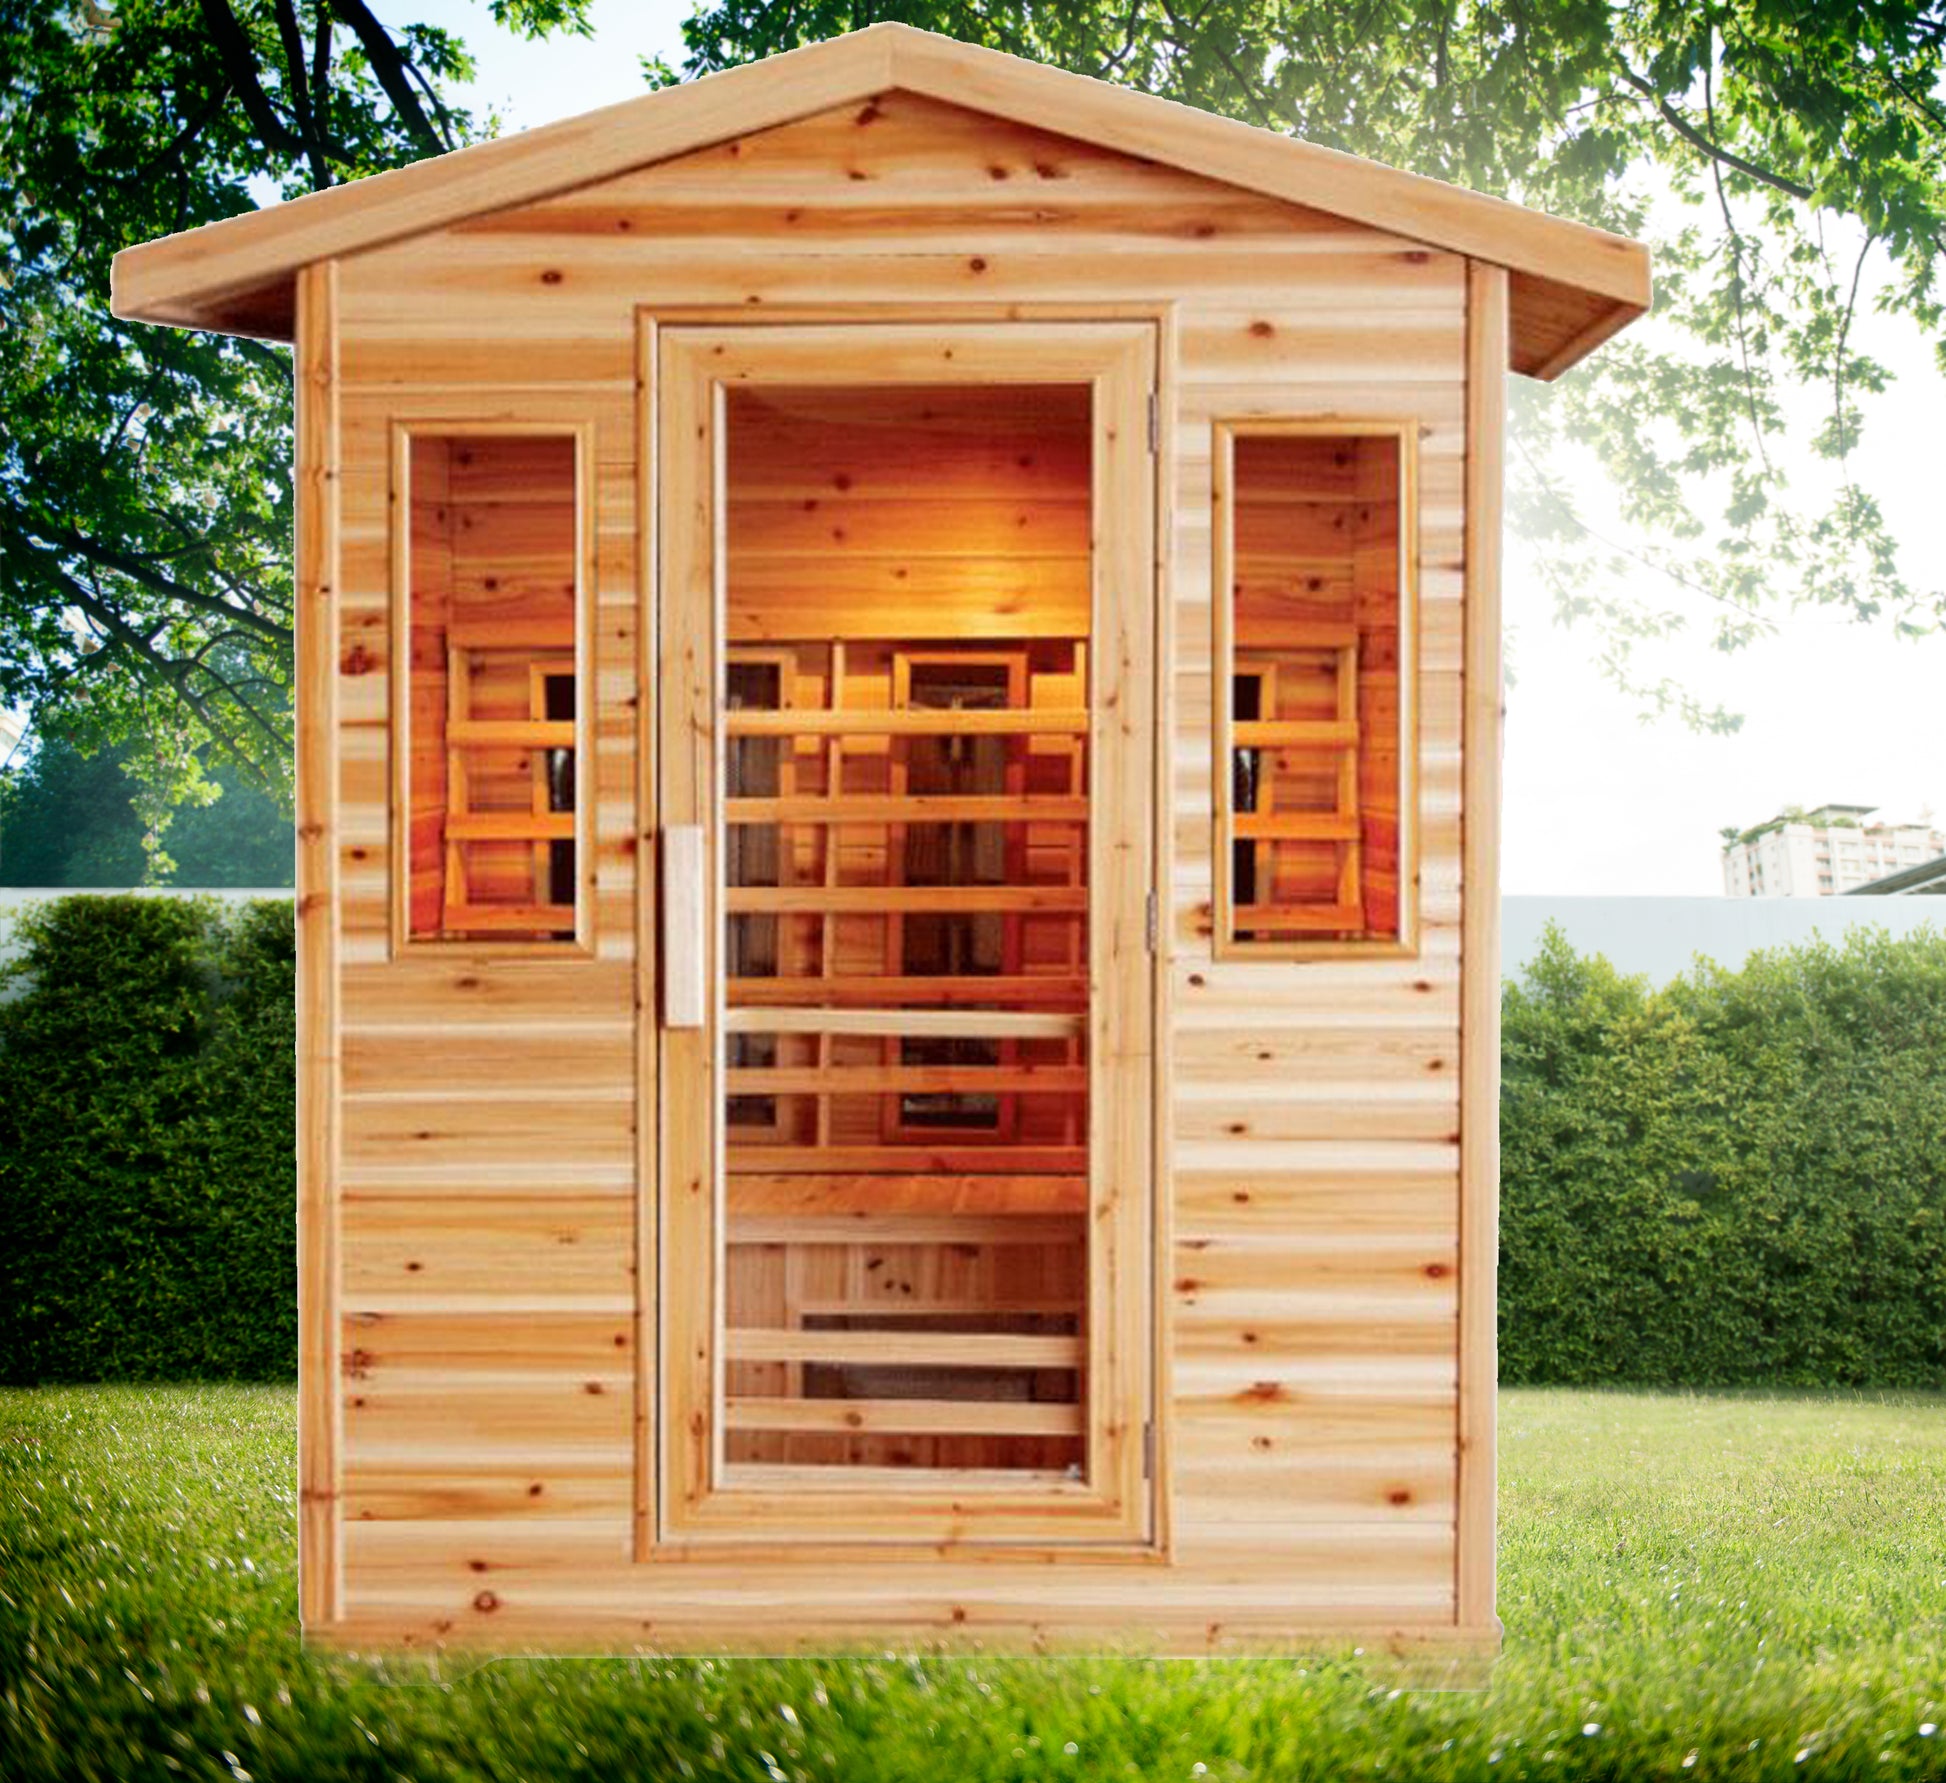 SunRay Cayenne HL400D - 4 Person Outdoor Infrared Sauna Outdoors